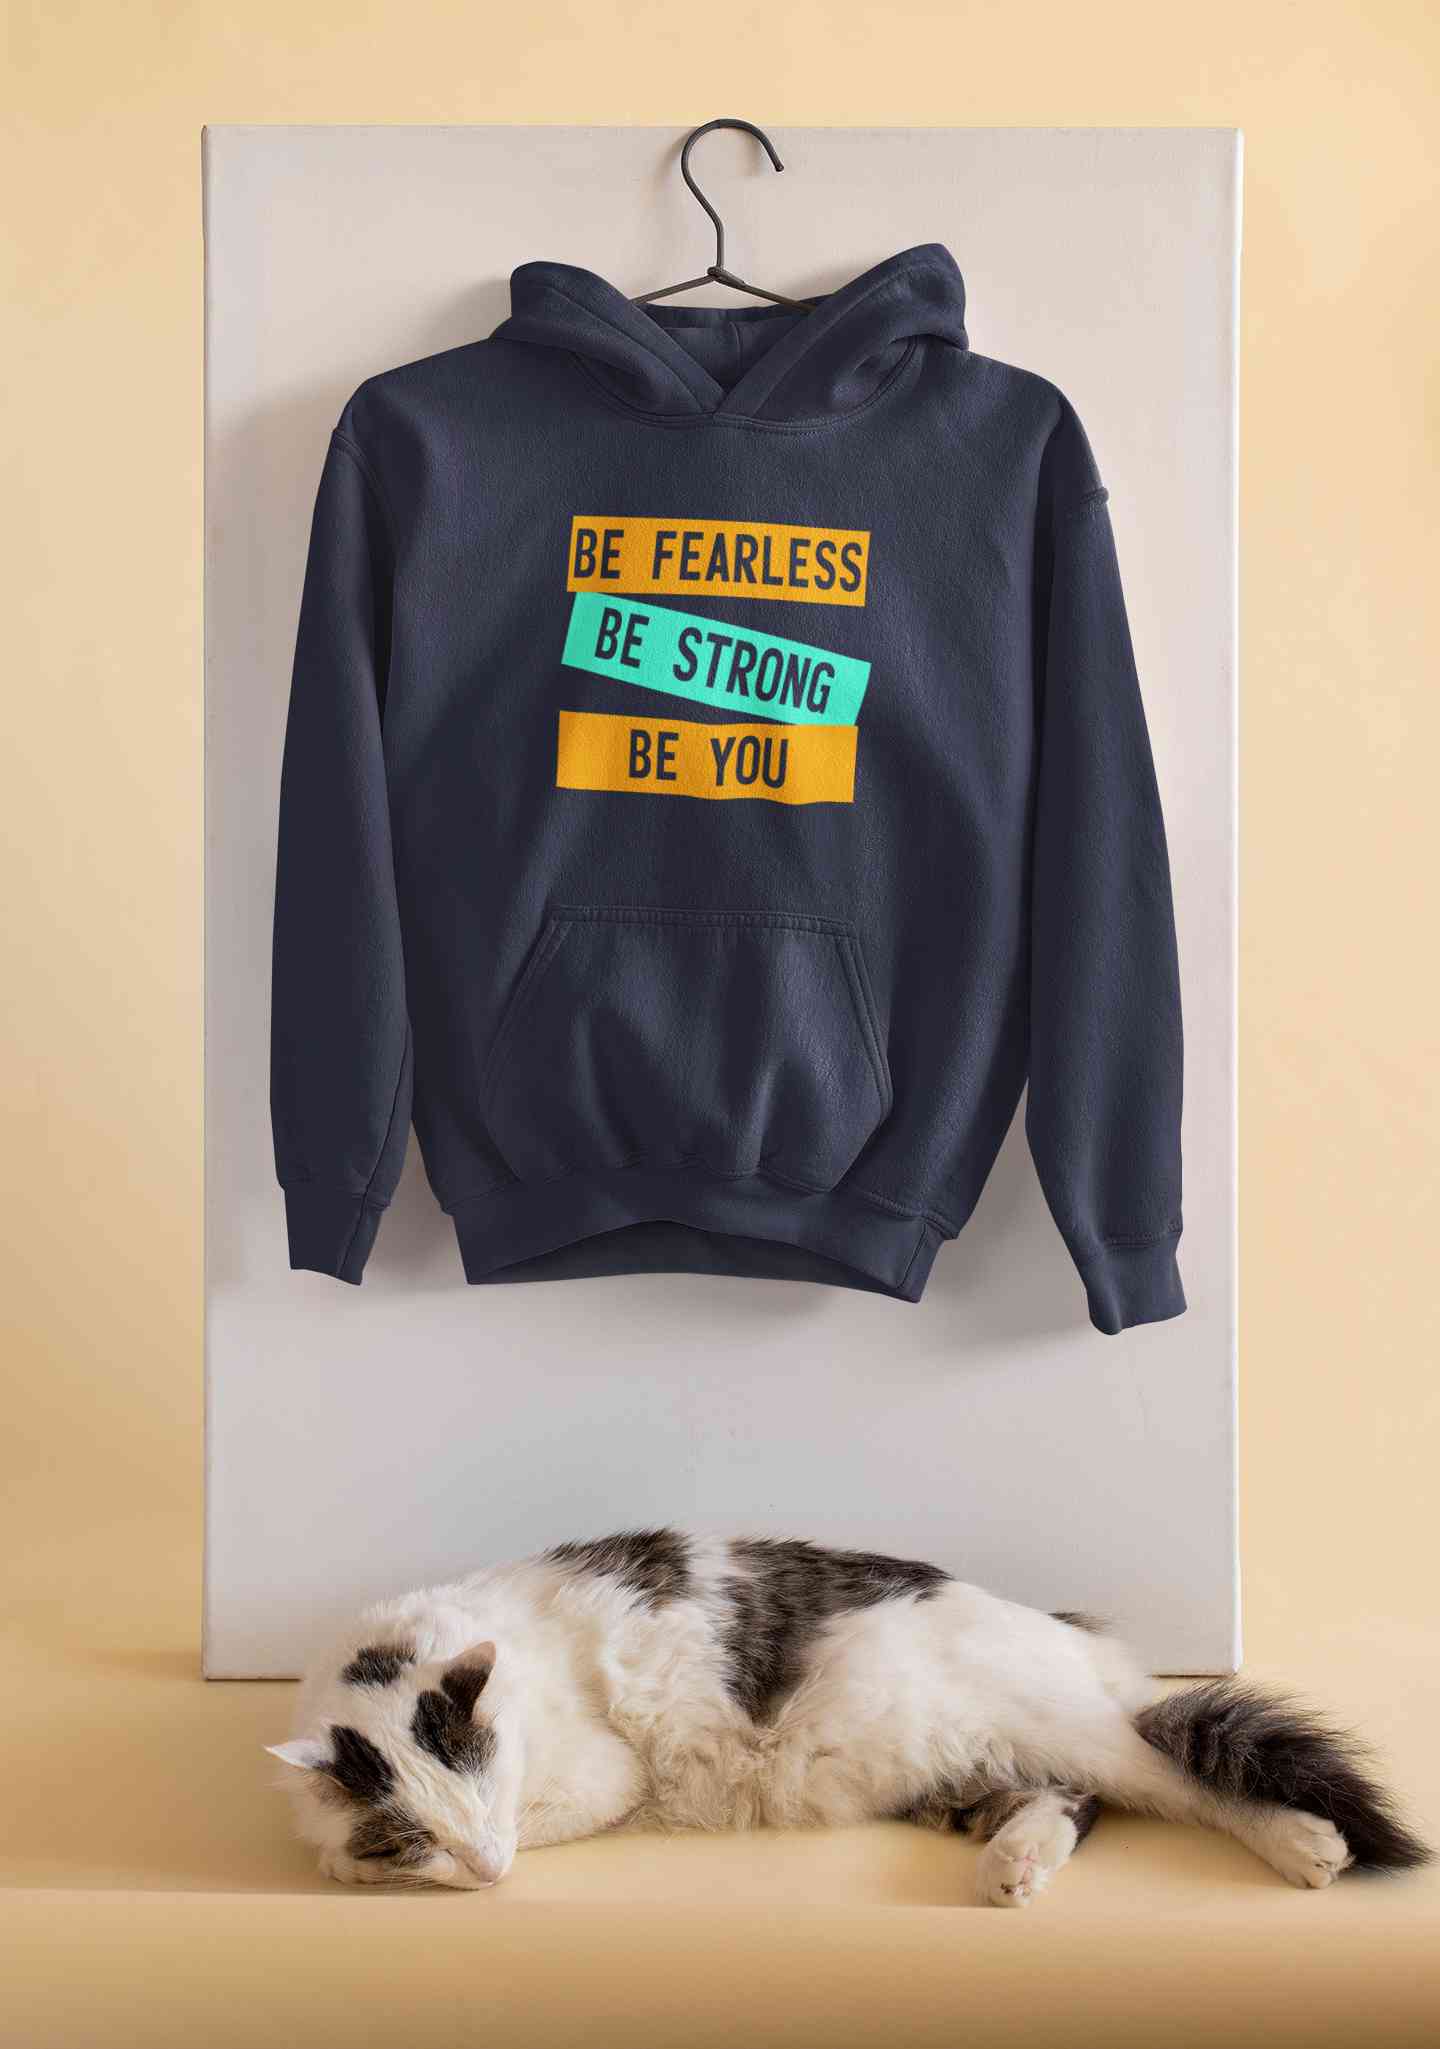 Be Fearless Be strong Be You Hoodies for Women-FunkyTeesClub